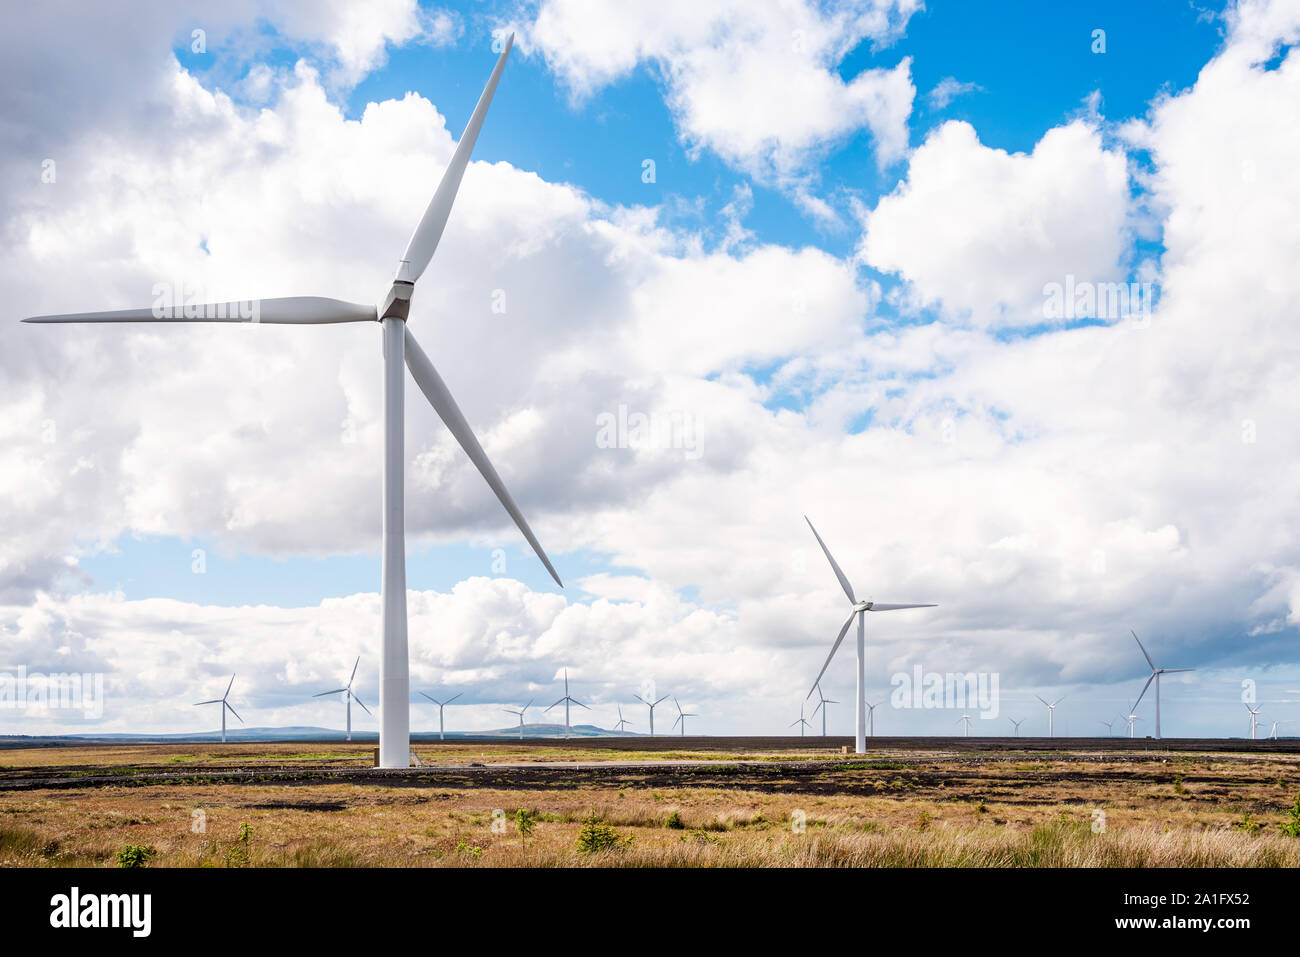 Wind turbine for electricity generation in a field on a partly cloudy spring day Stock Photo